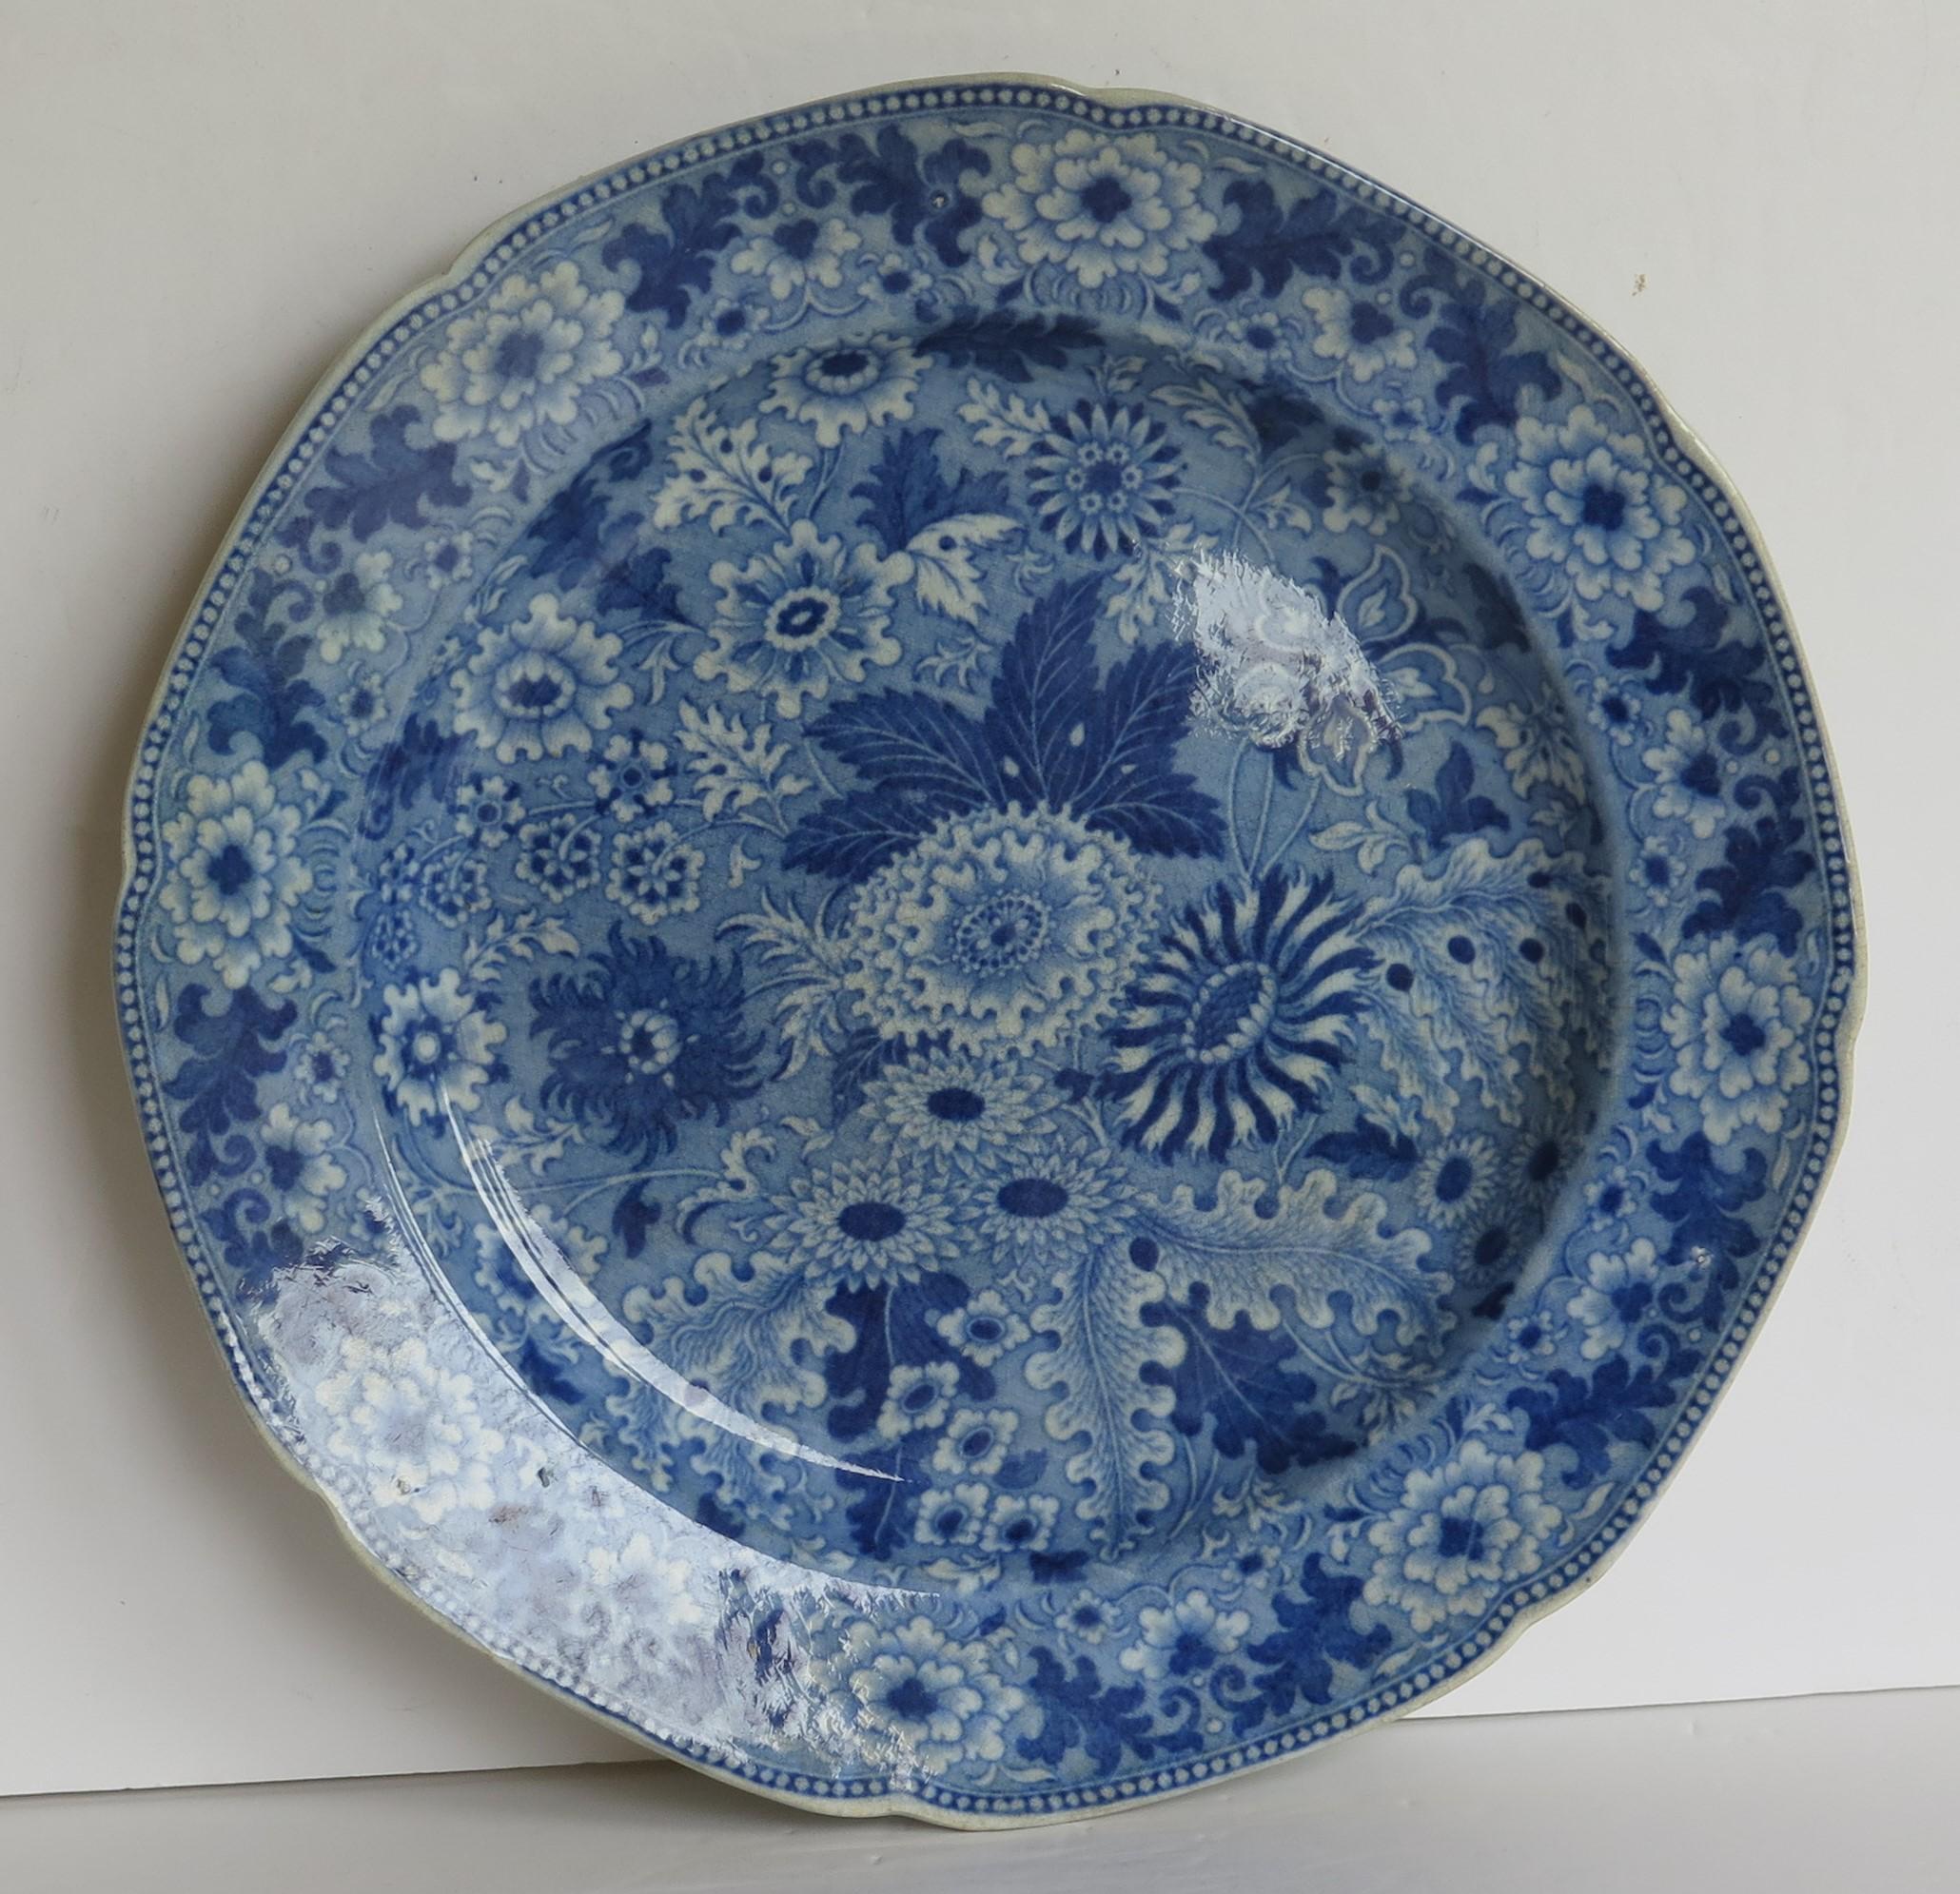 This is a beautiful early plate in a printed blue and white floral pattern and made of a type of earthenware pottery called pearlware, in the very early 19th century, by Henshall & Co., of Longport, Staffordshire Potteries, circa 1810.

Pieces by